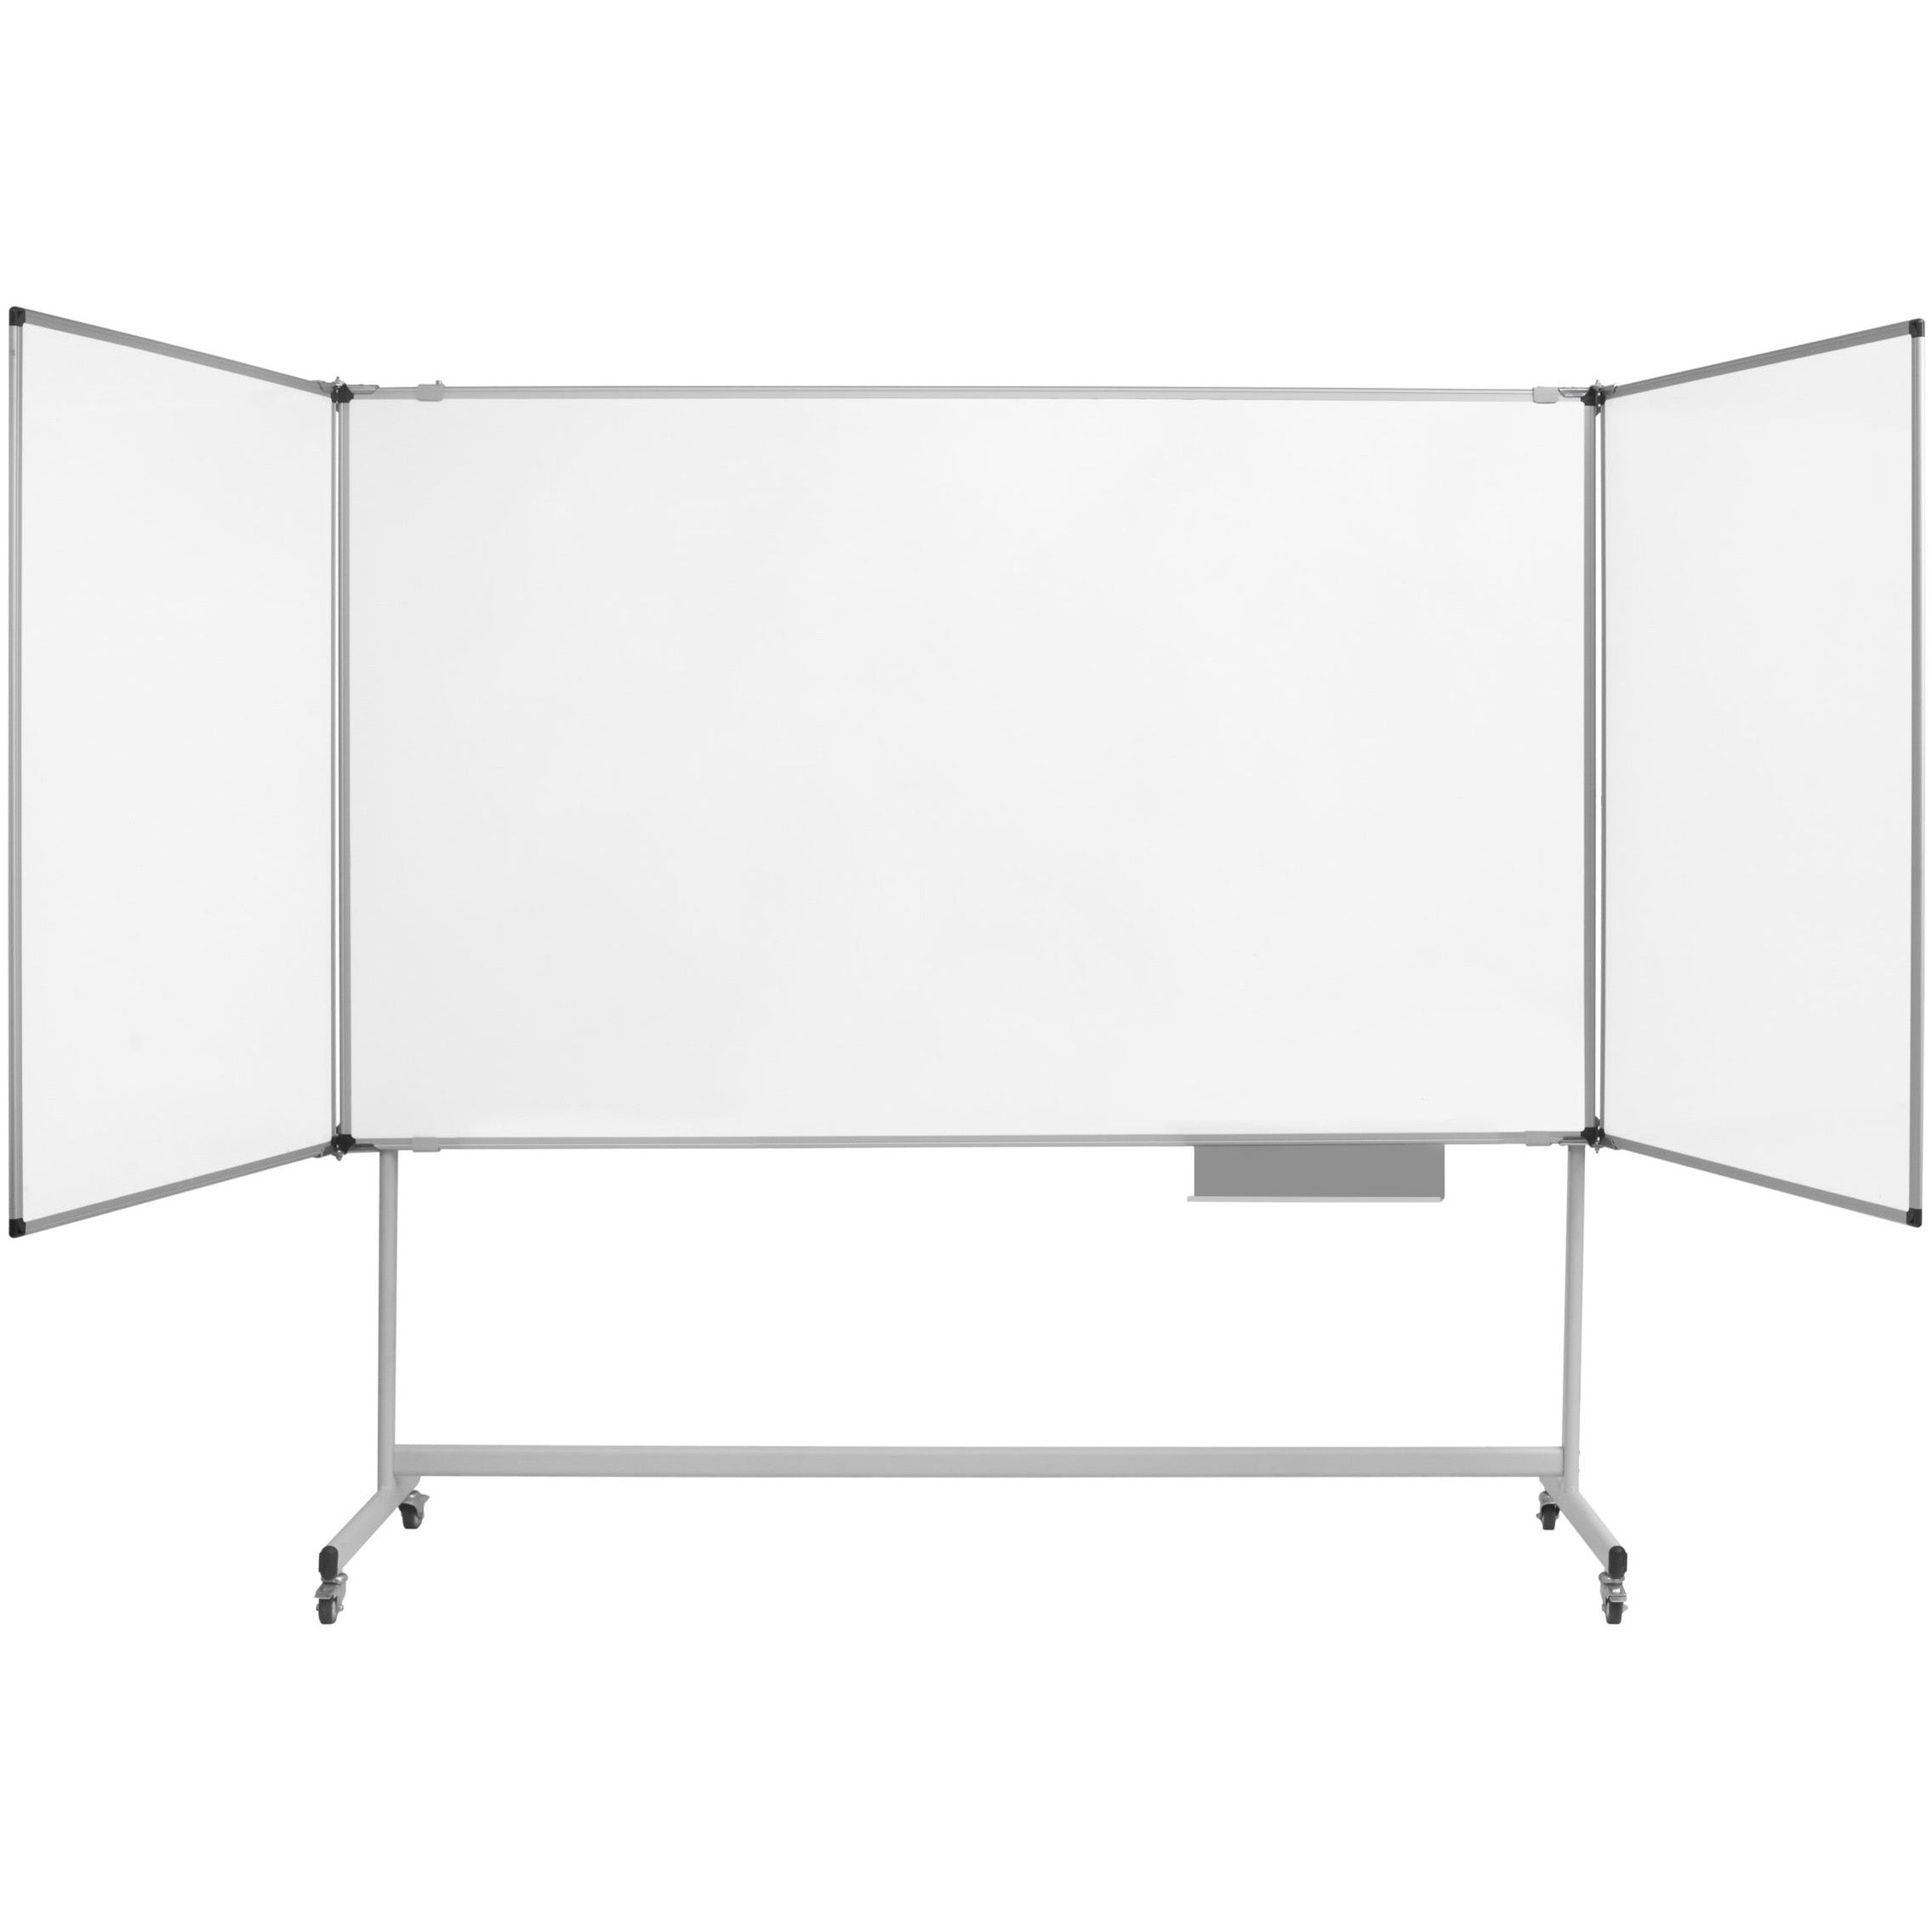 TS05042170 Maya Series Industrial Mobile Trio Tri-Panel Confernece Magnetic Whiteboard, 40" x 80" by MasterVision